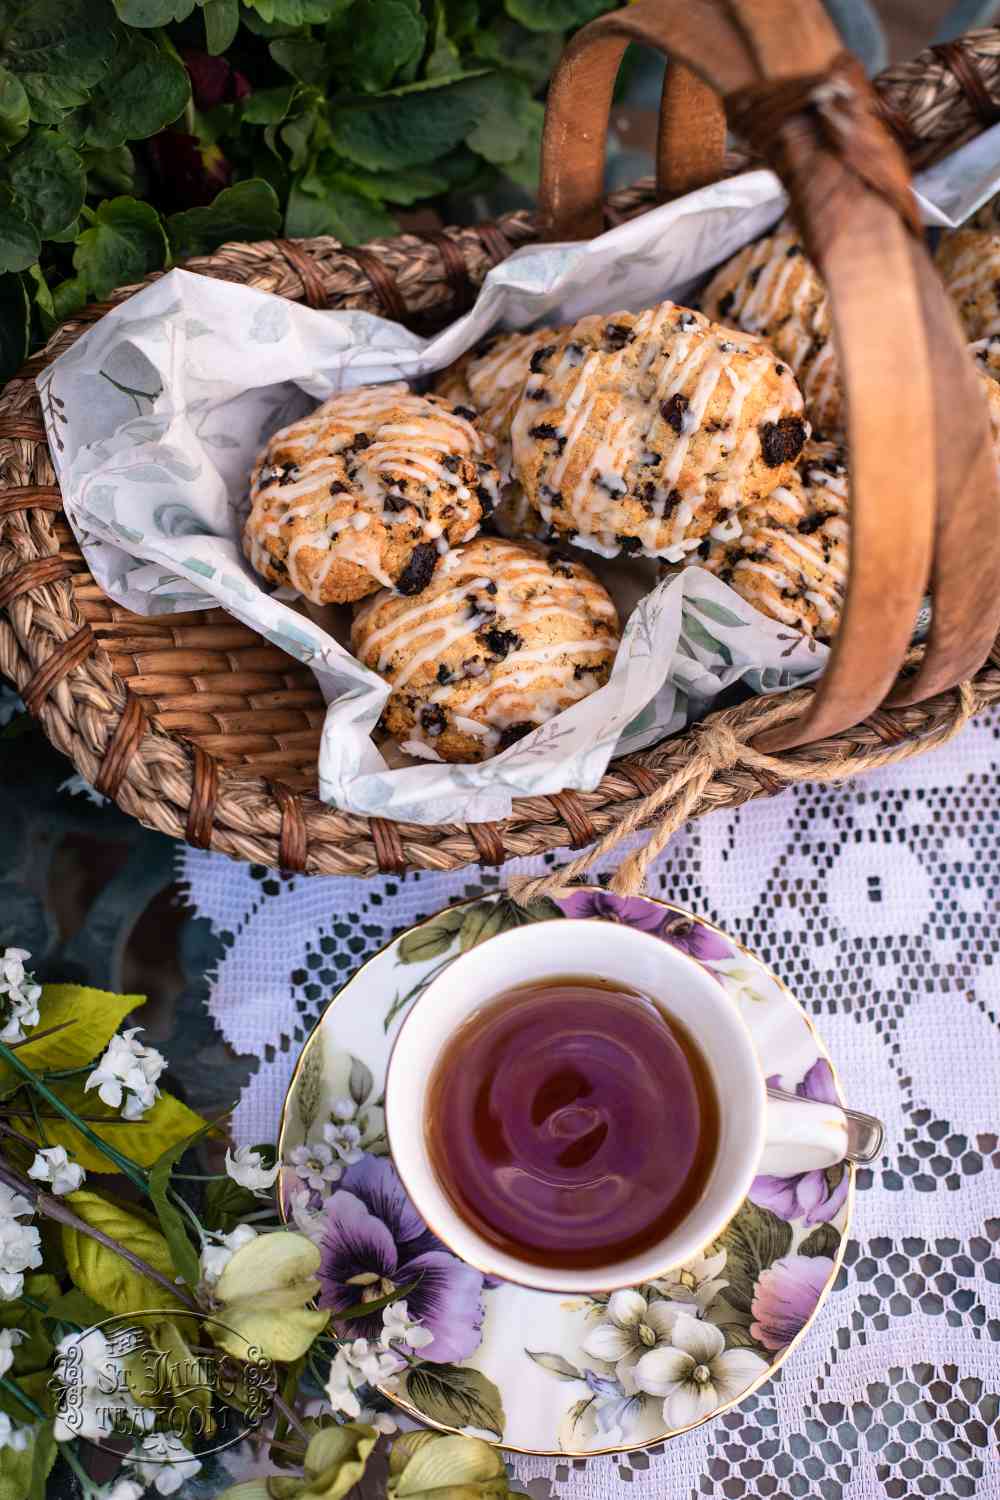 St. James Easter Scones Recipe - Serve with a Cup of Tea